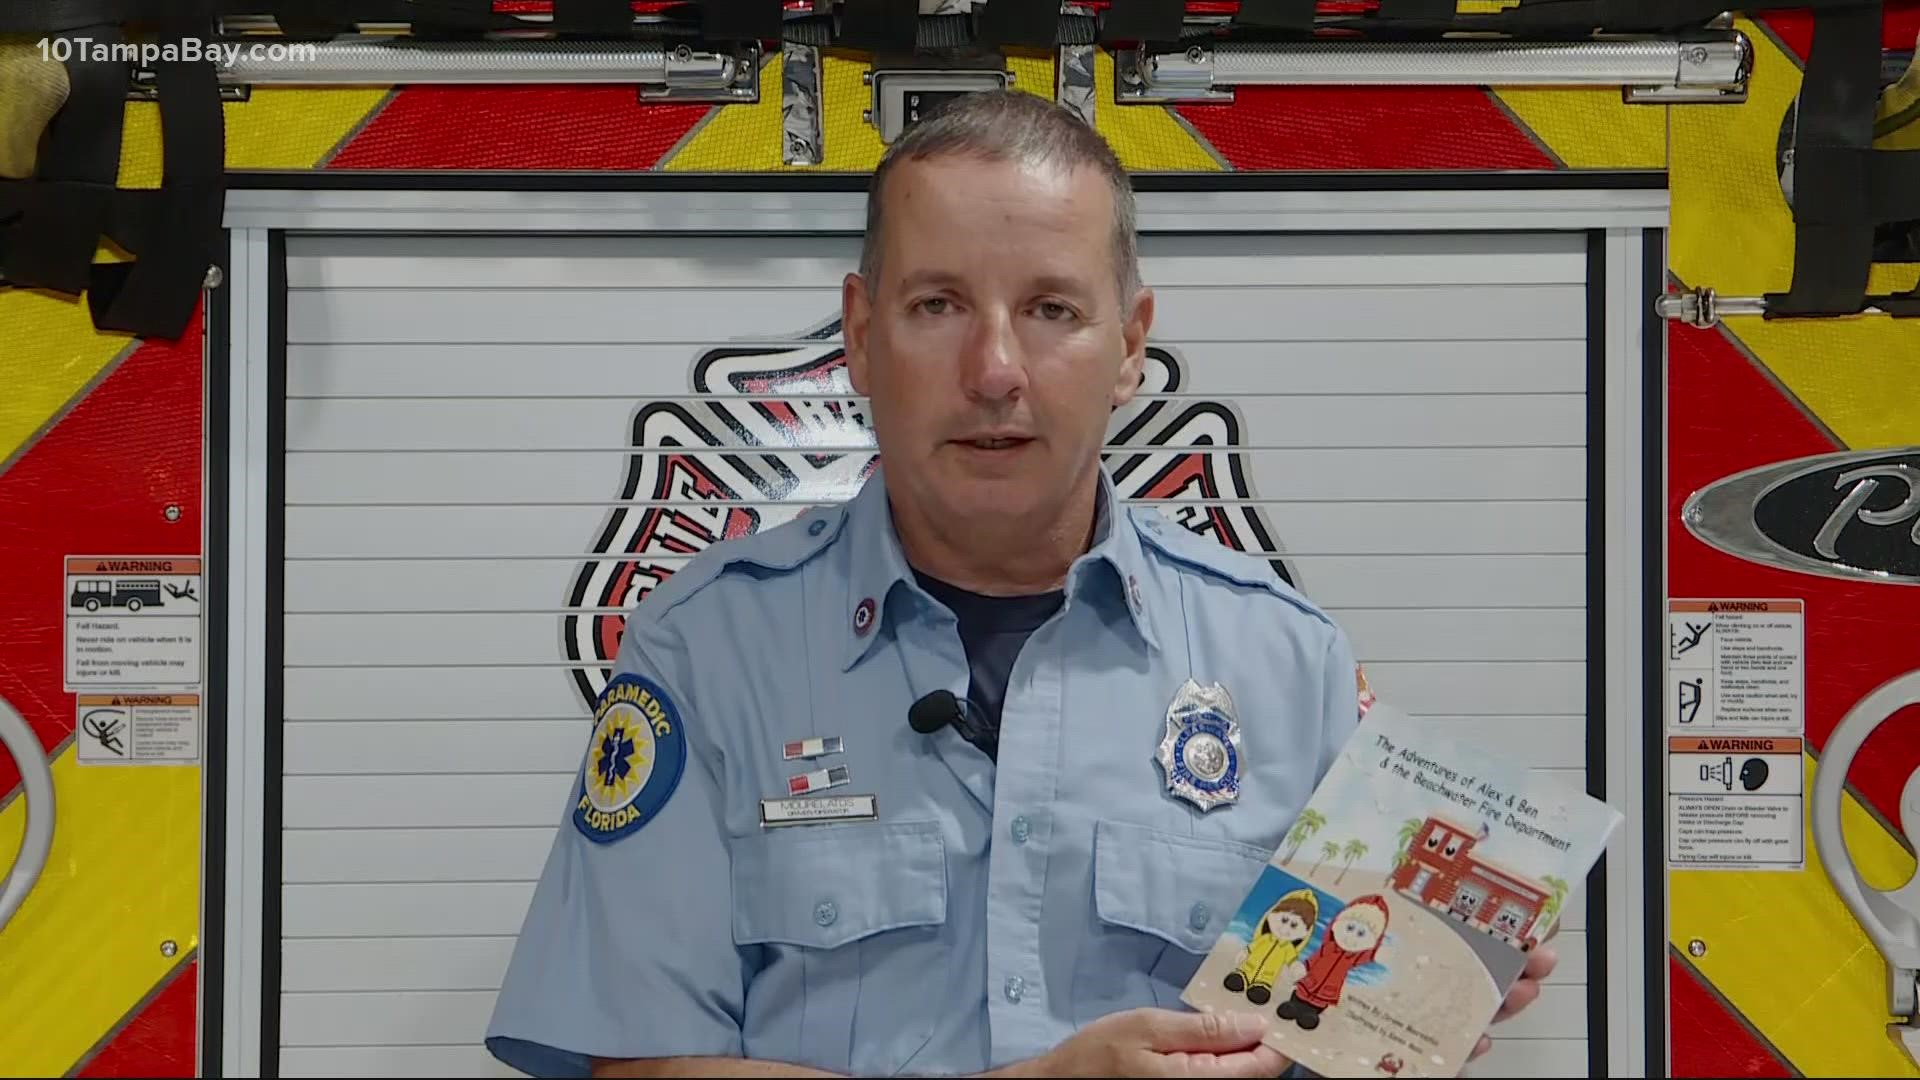 Jerome Mourelatos noticed firefighters were mostly depicted as people running into burning buildings in the books he read his kids.